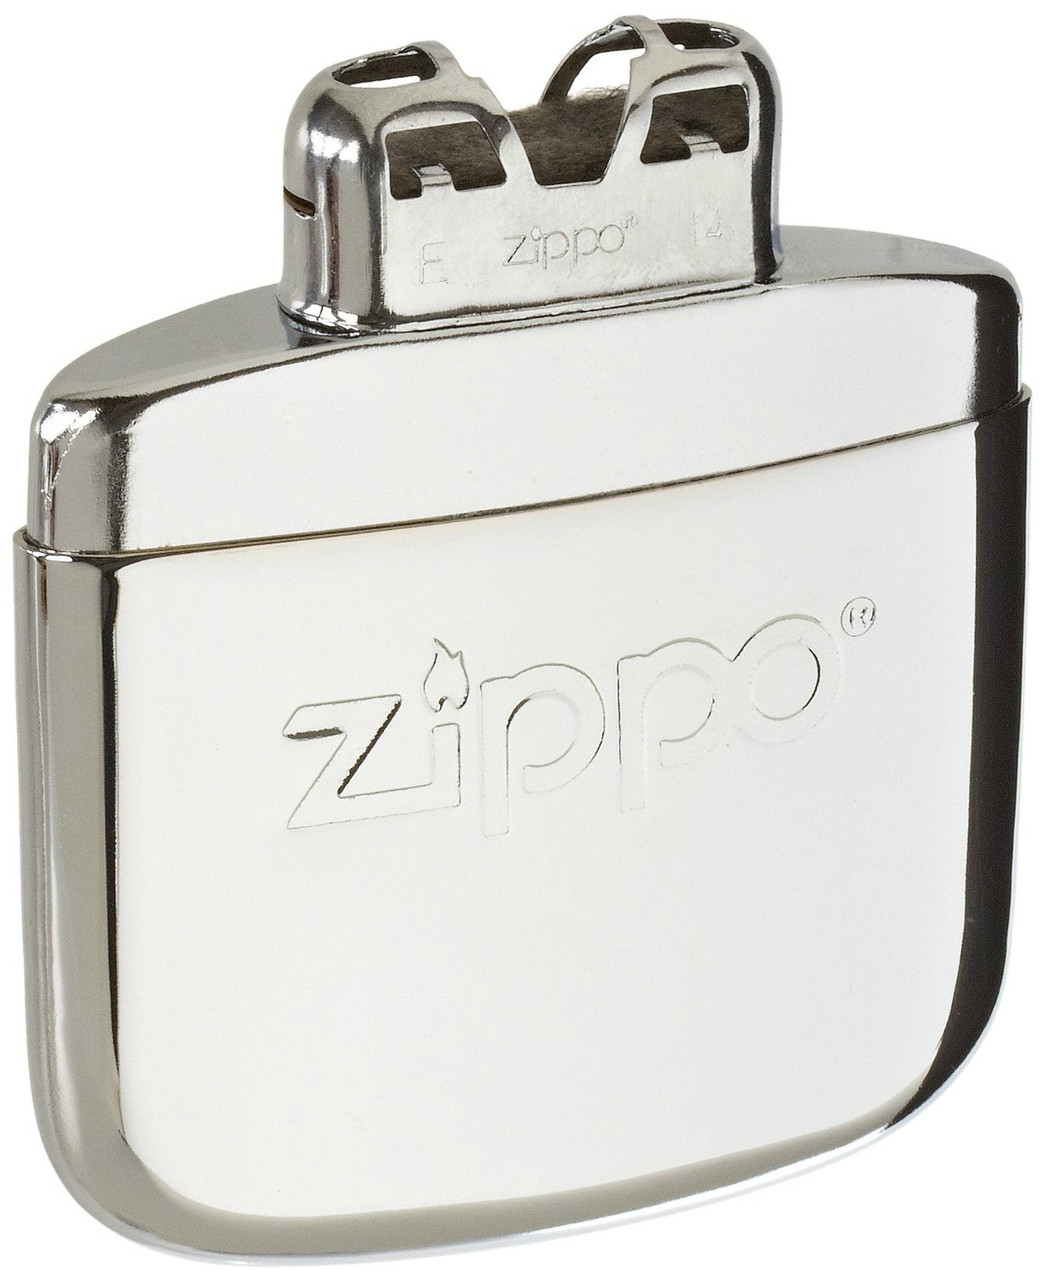 Details about   Zippo 12-Hour High Polish Chrome Refillable Hand Warmer 40323 